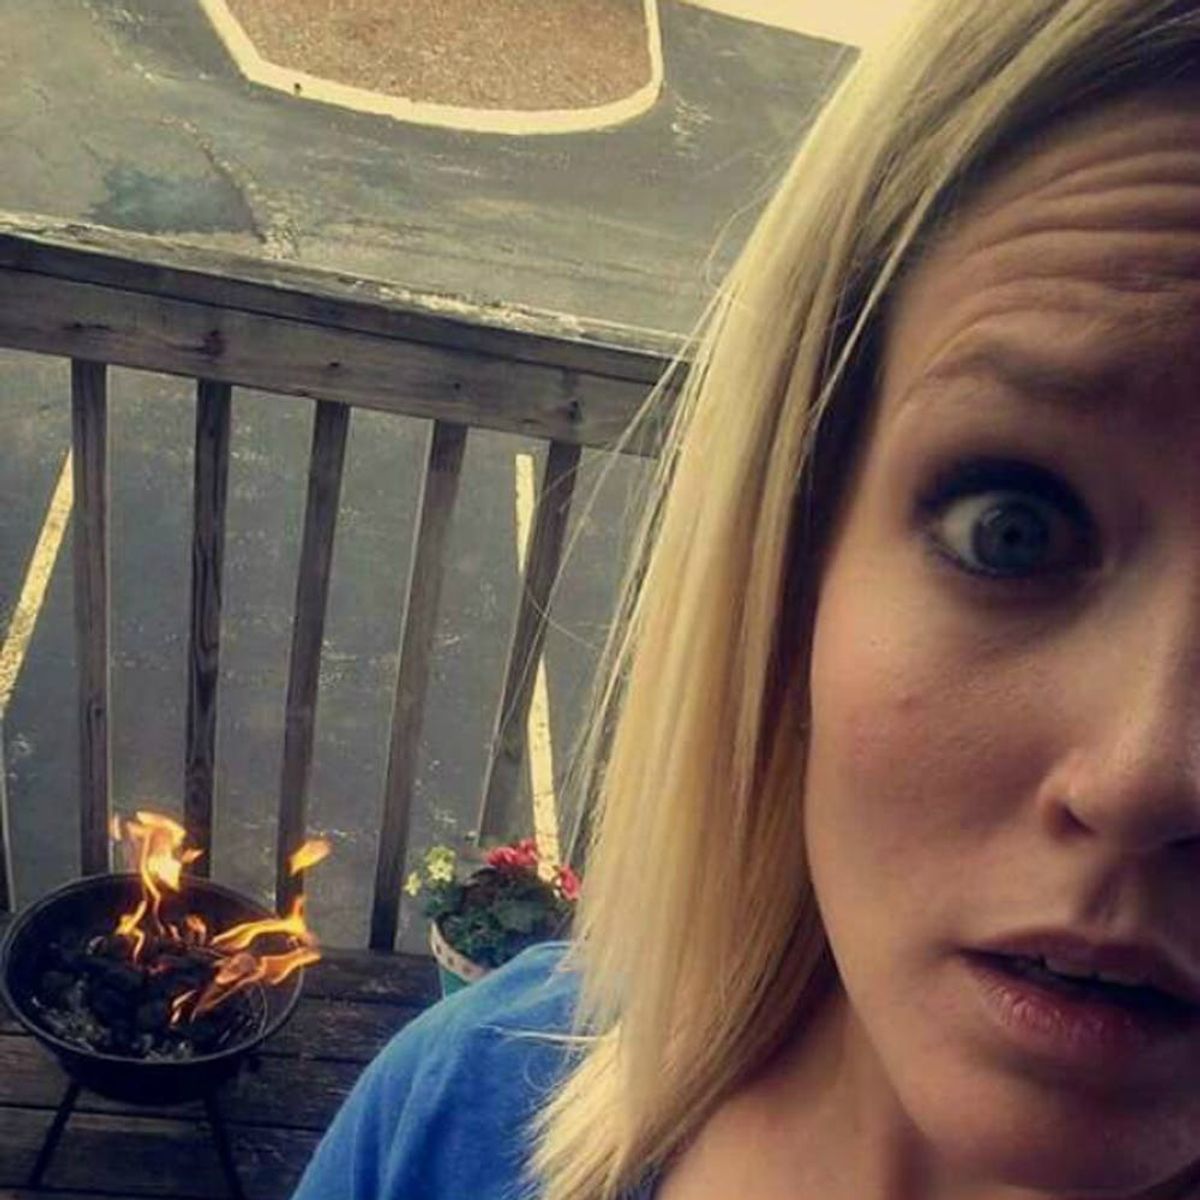 This Woman’s DIY Grilling Fail Is All of Us